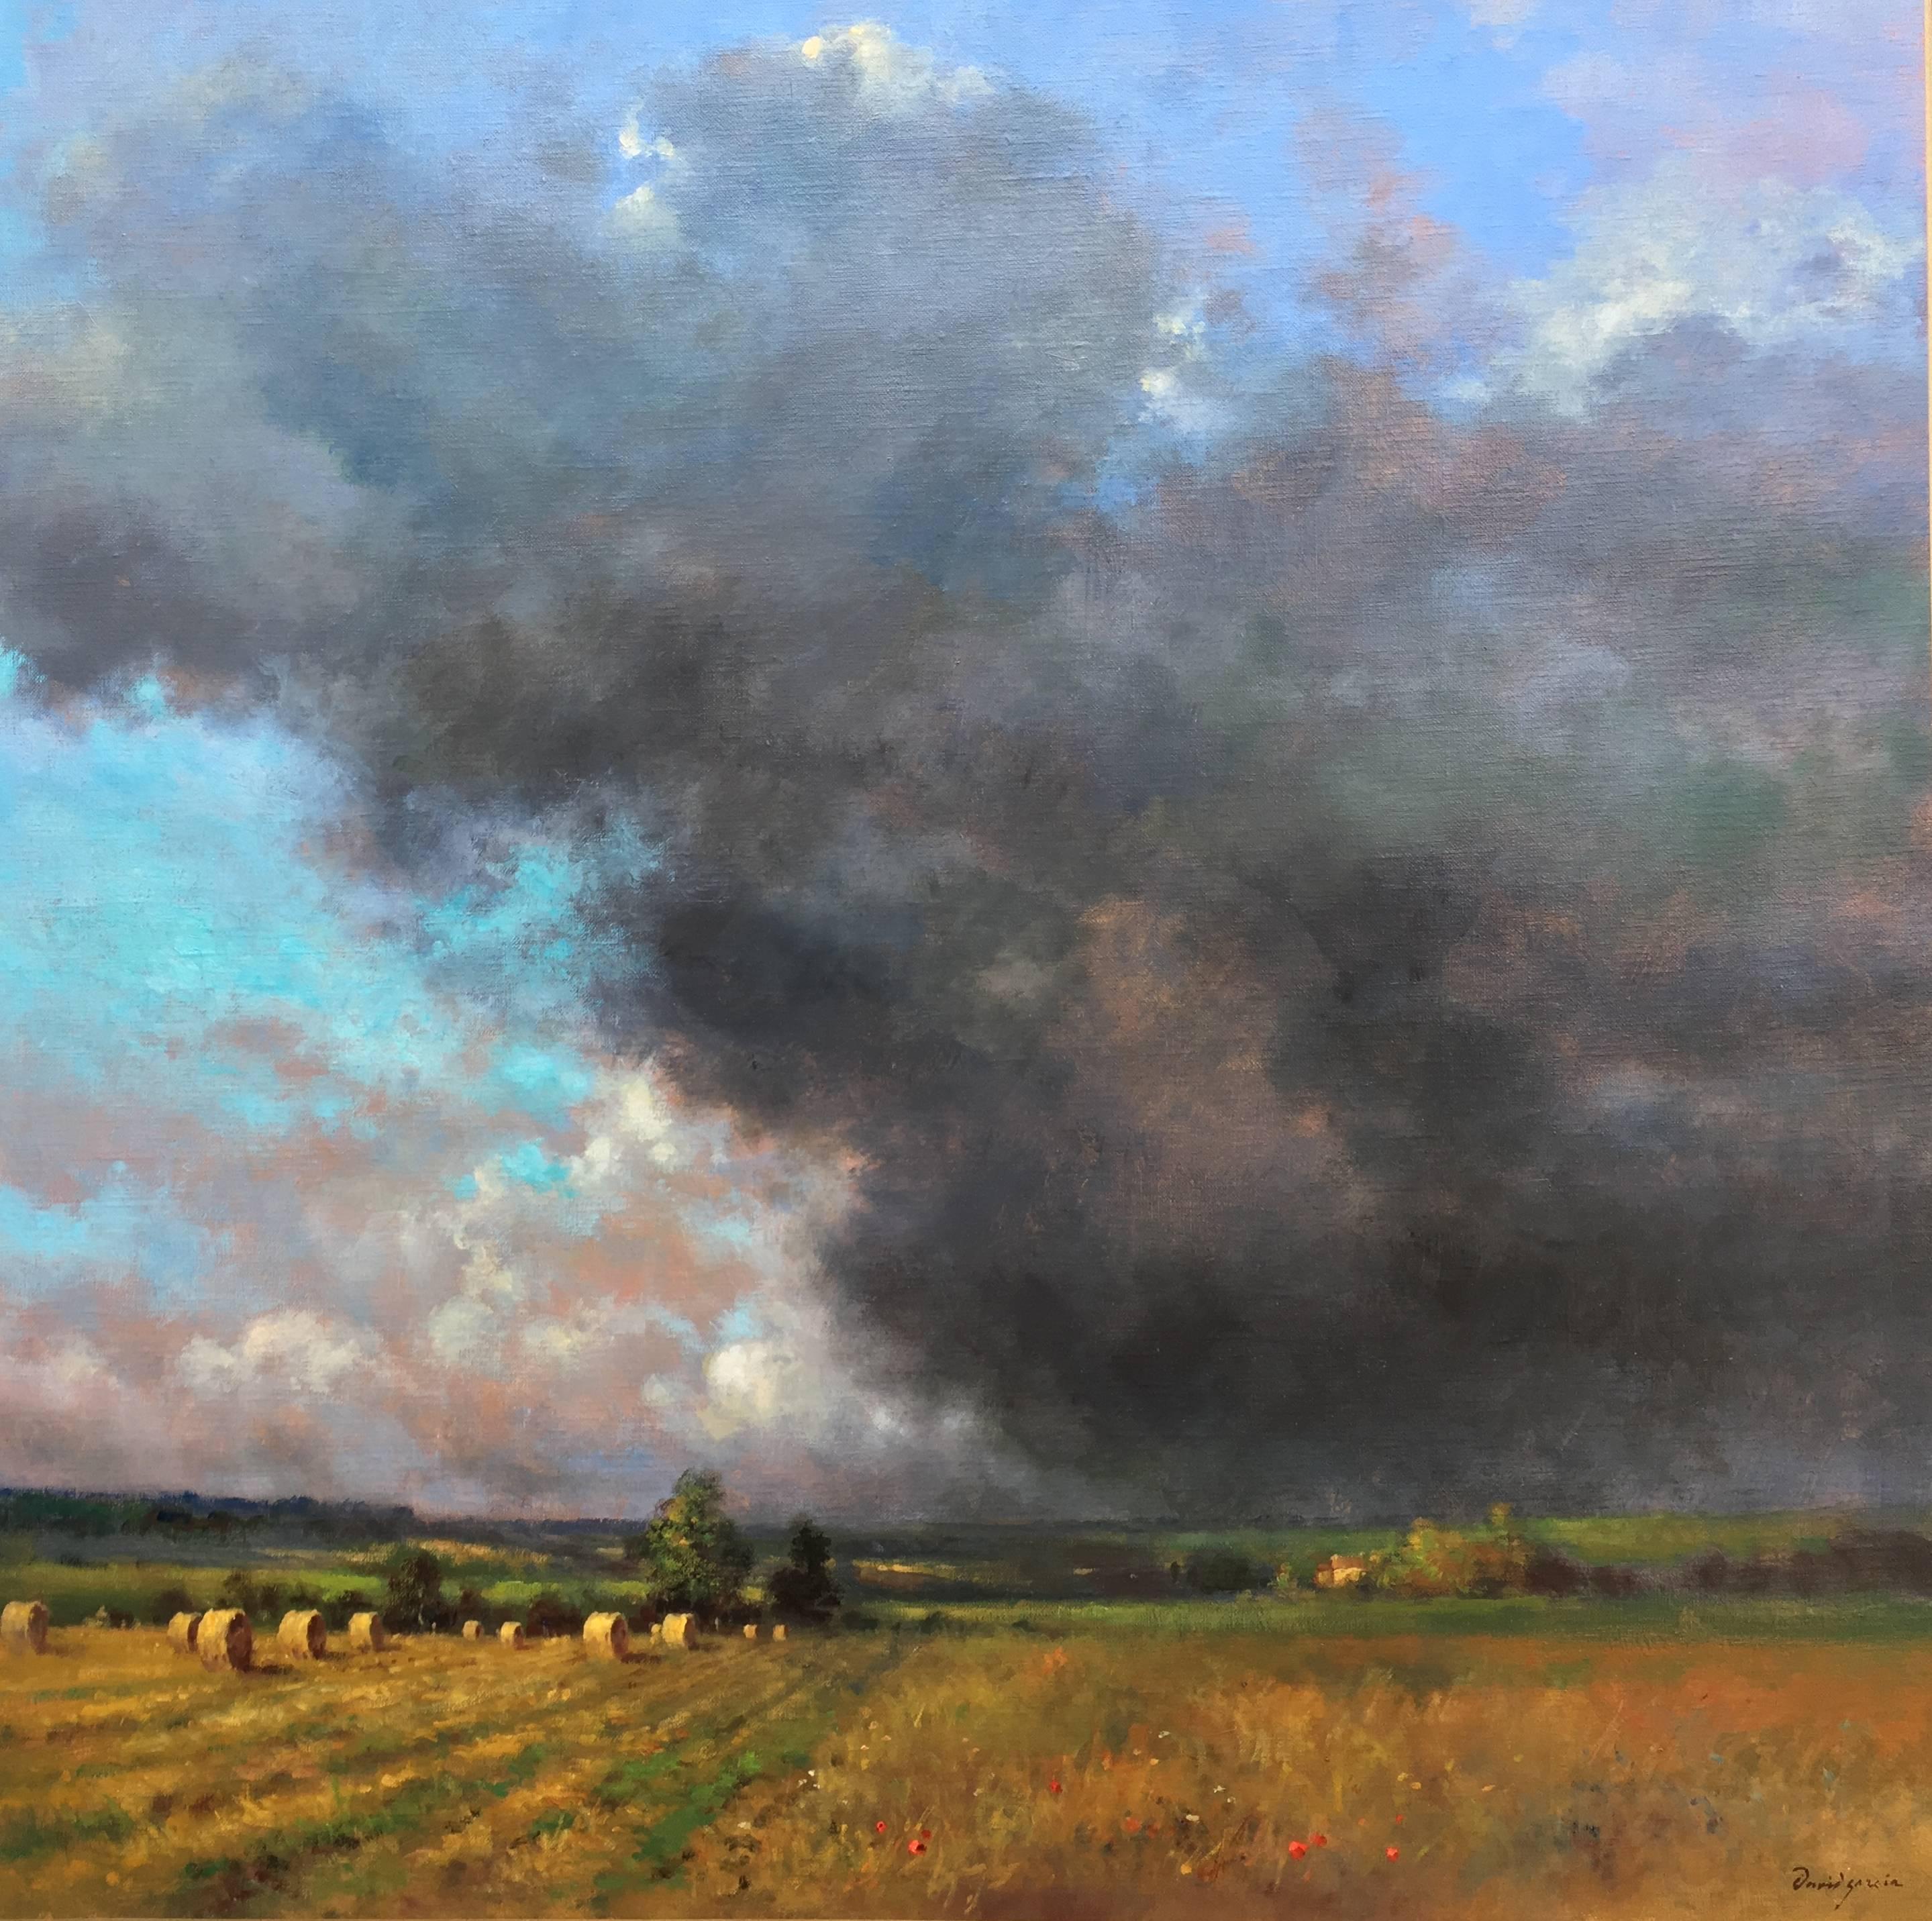 David Garcia Landscape Painting - Before the big storm, post-impressionist style oil painting